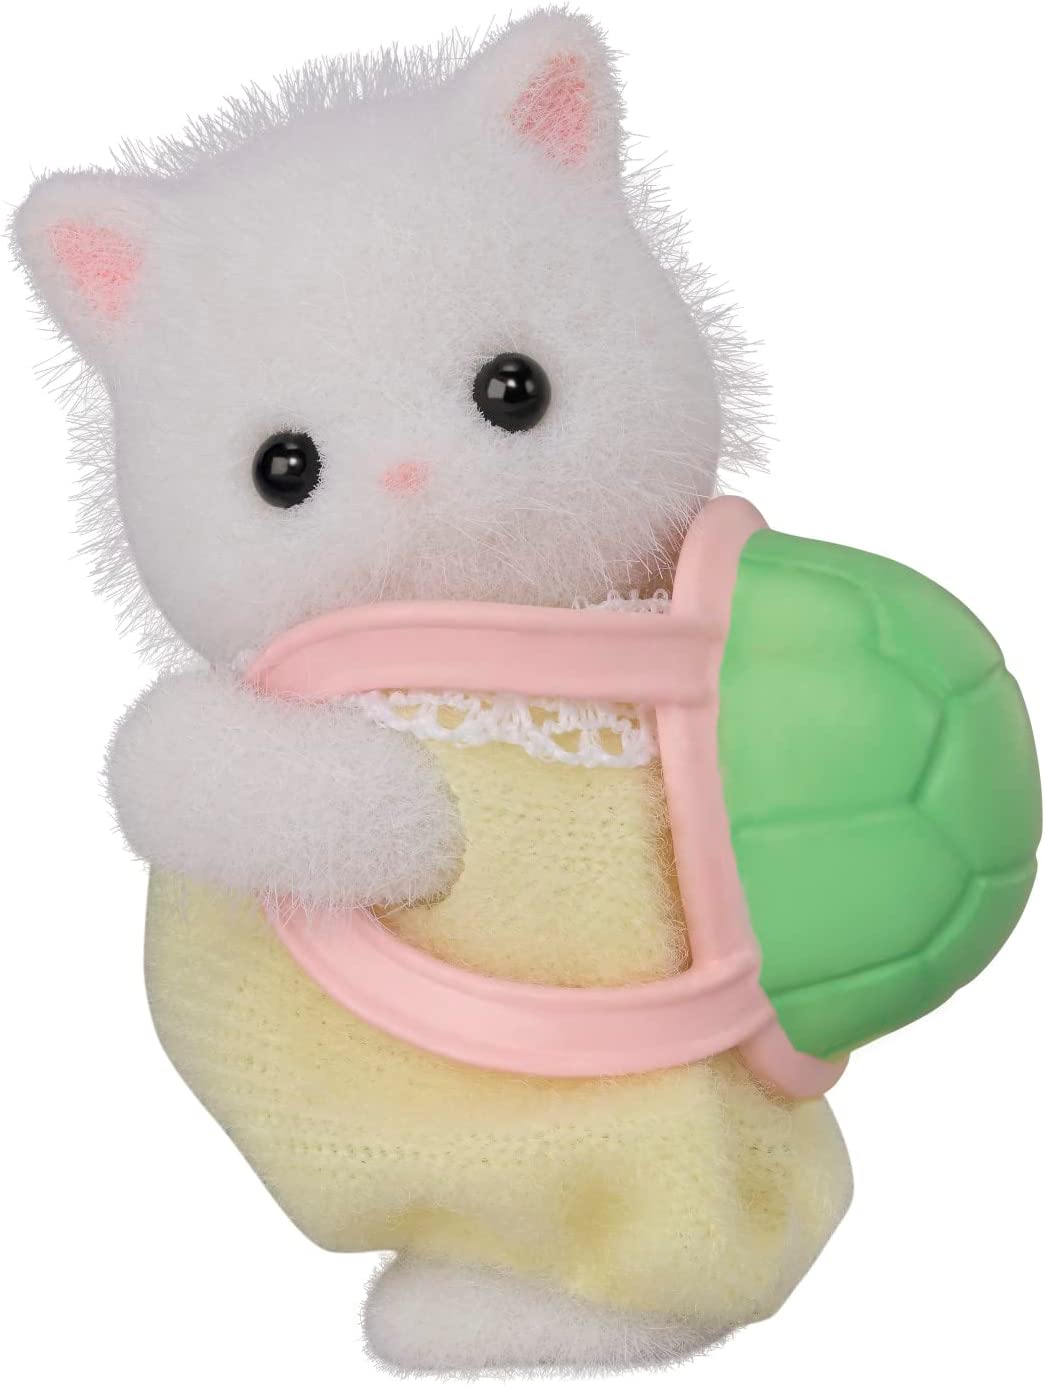 https://www.youloveit.com/uploads/posts/2023-05/1683278714_youloveit_com_calico_critters_baby_sea_friends3.jpg